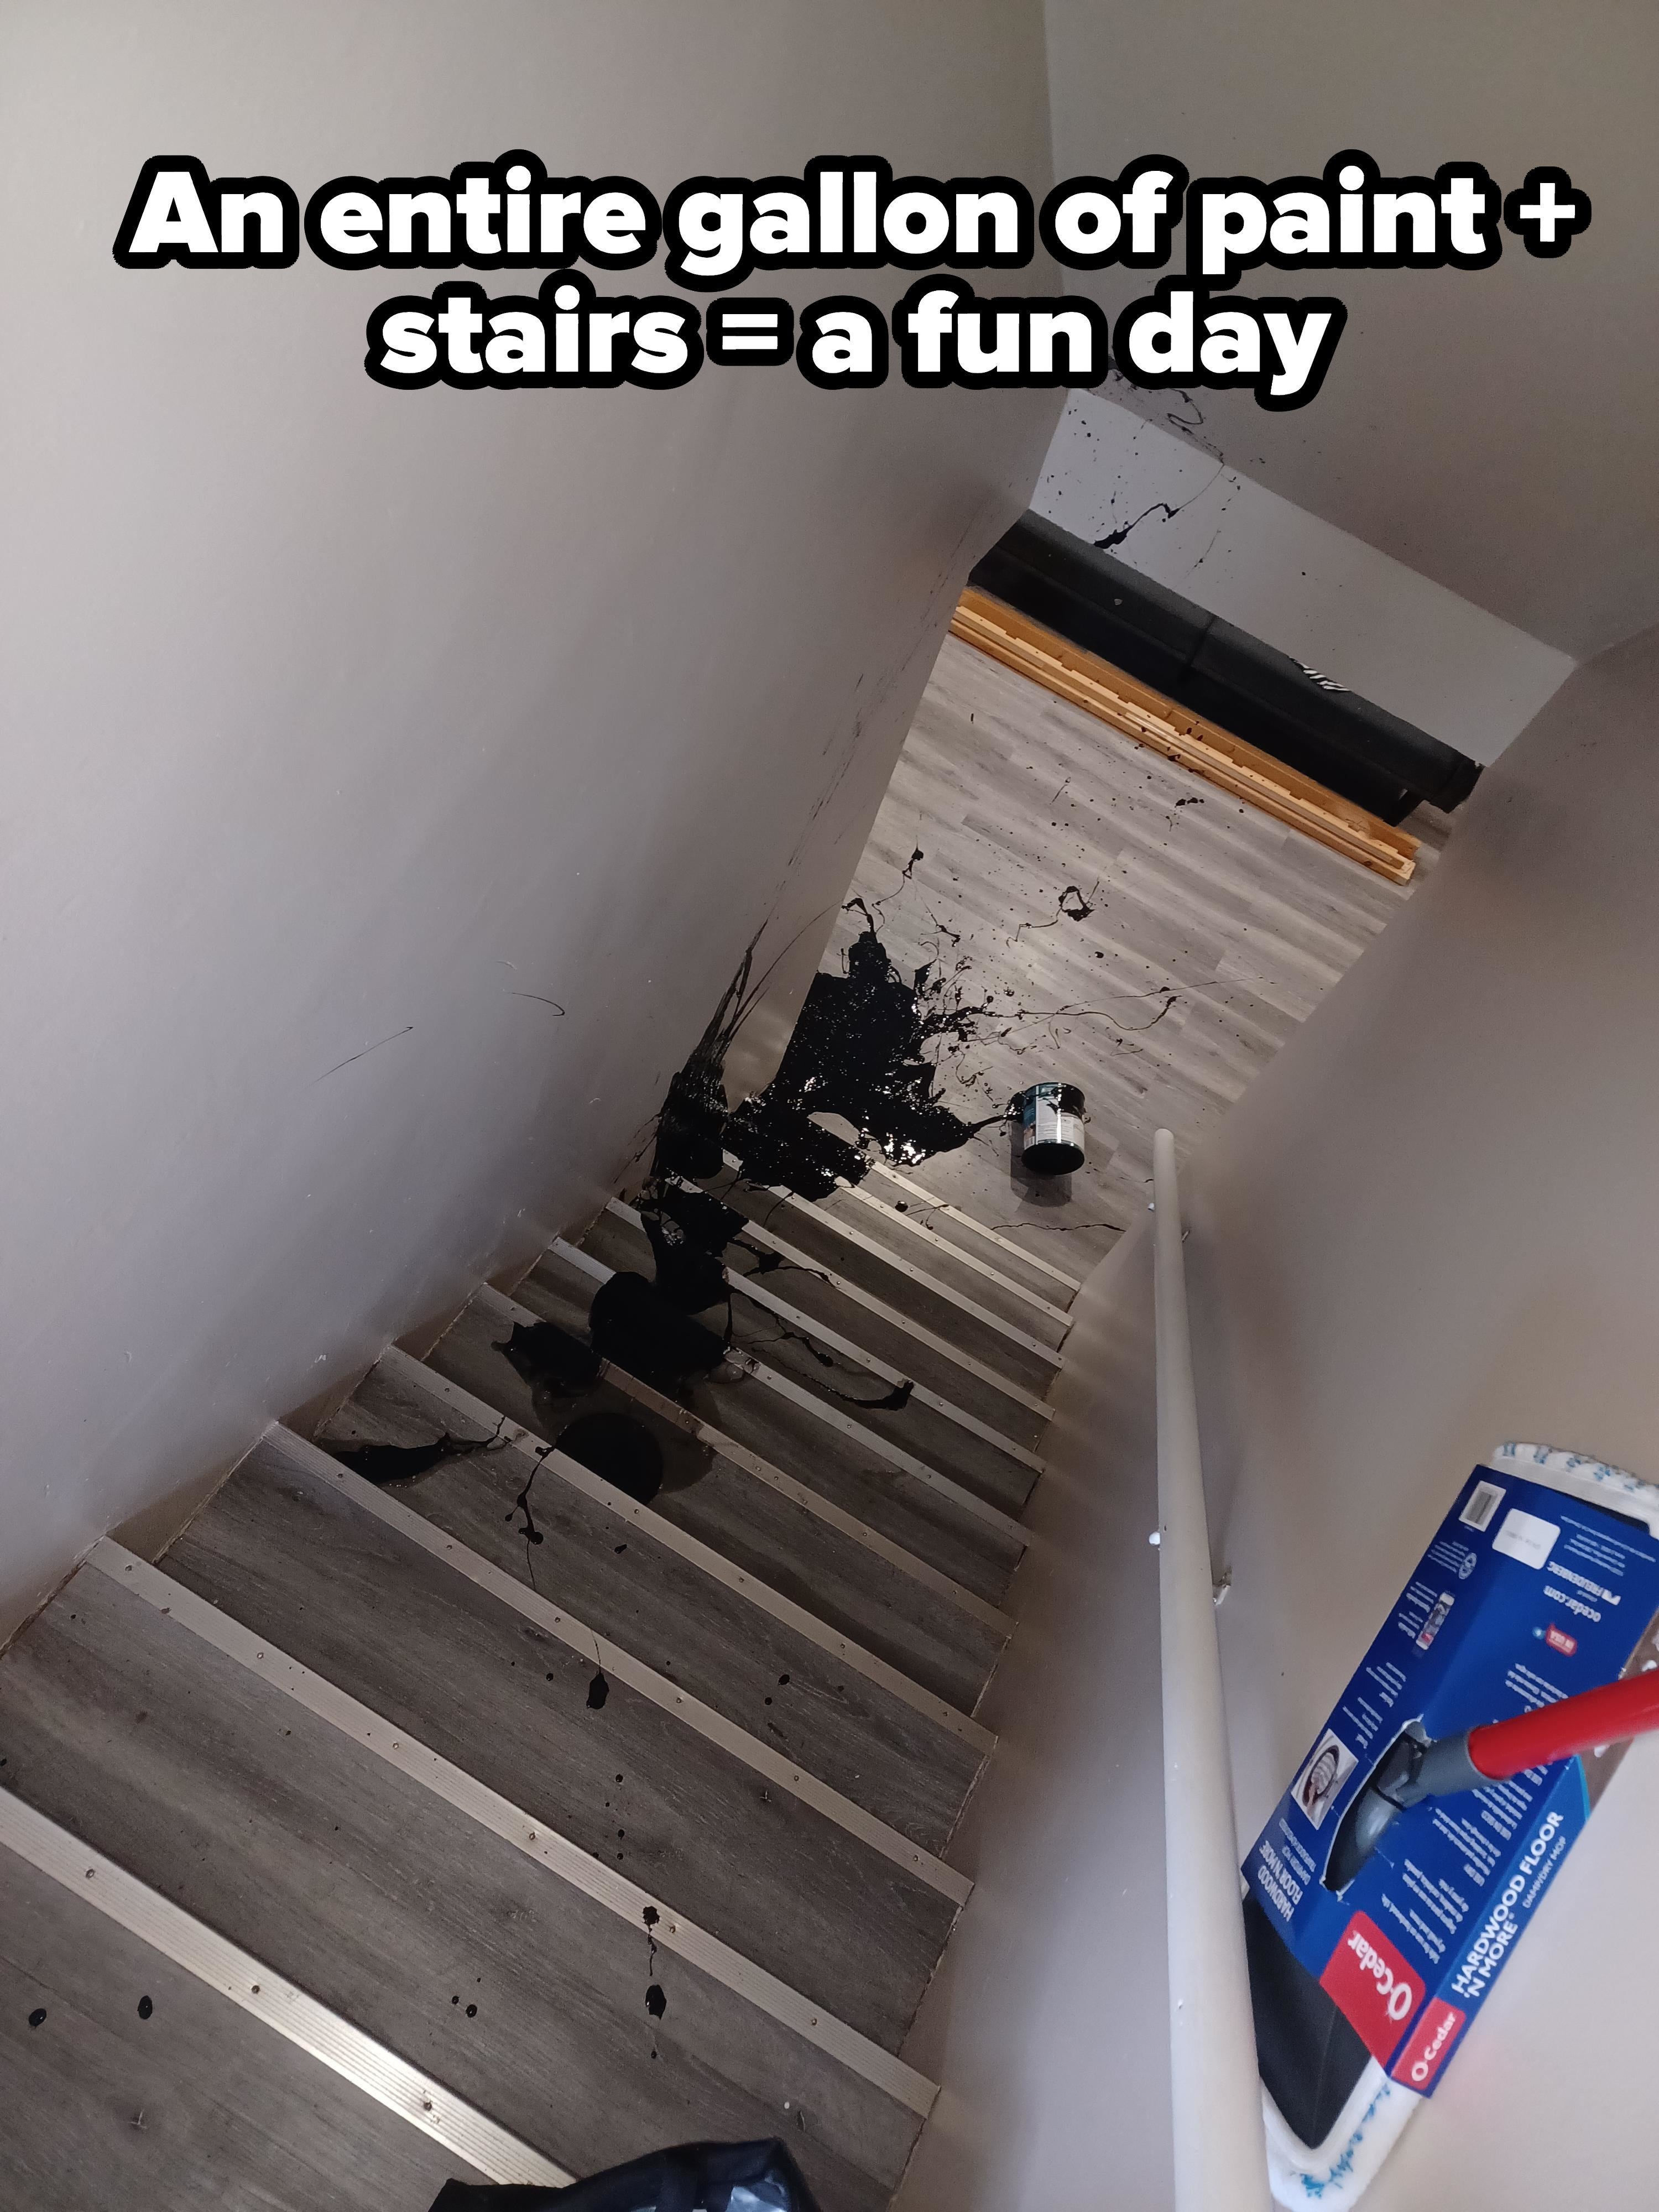 Paint spilled all over stairs